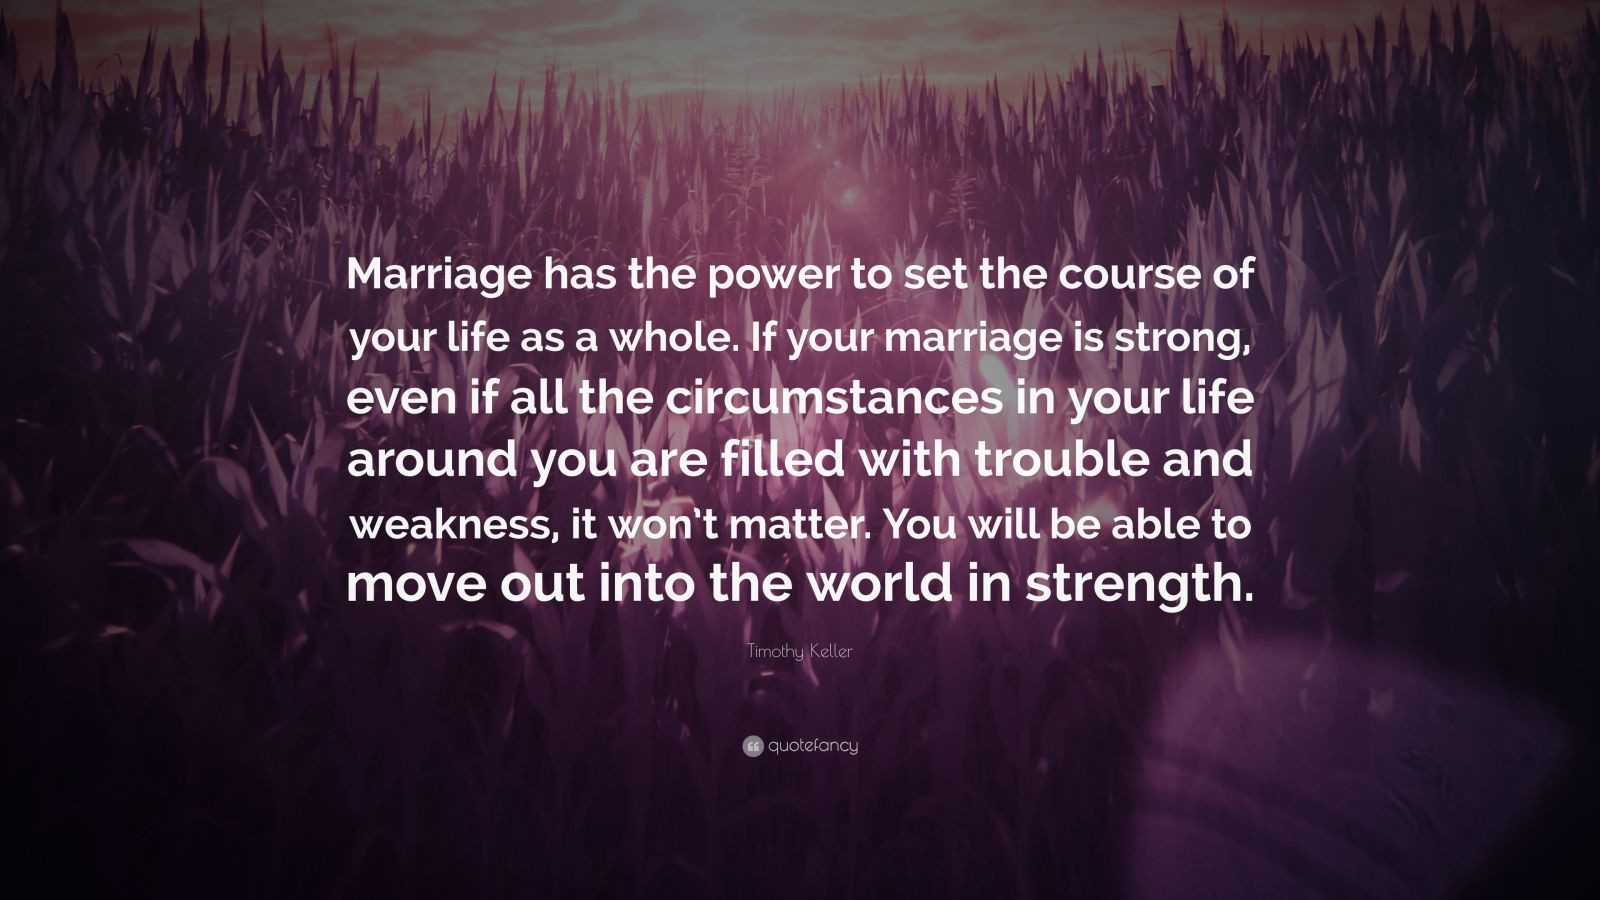 Tim Keller Marriage Quotes
 Timothy Keller Quote “Marriage has the power to set the